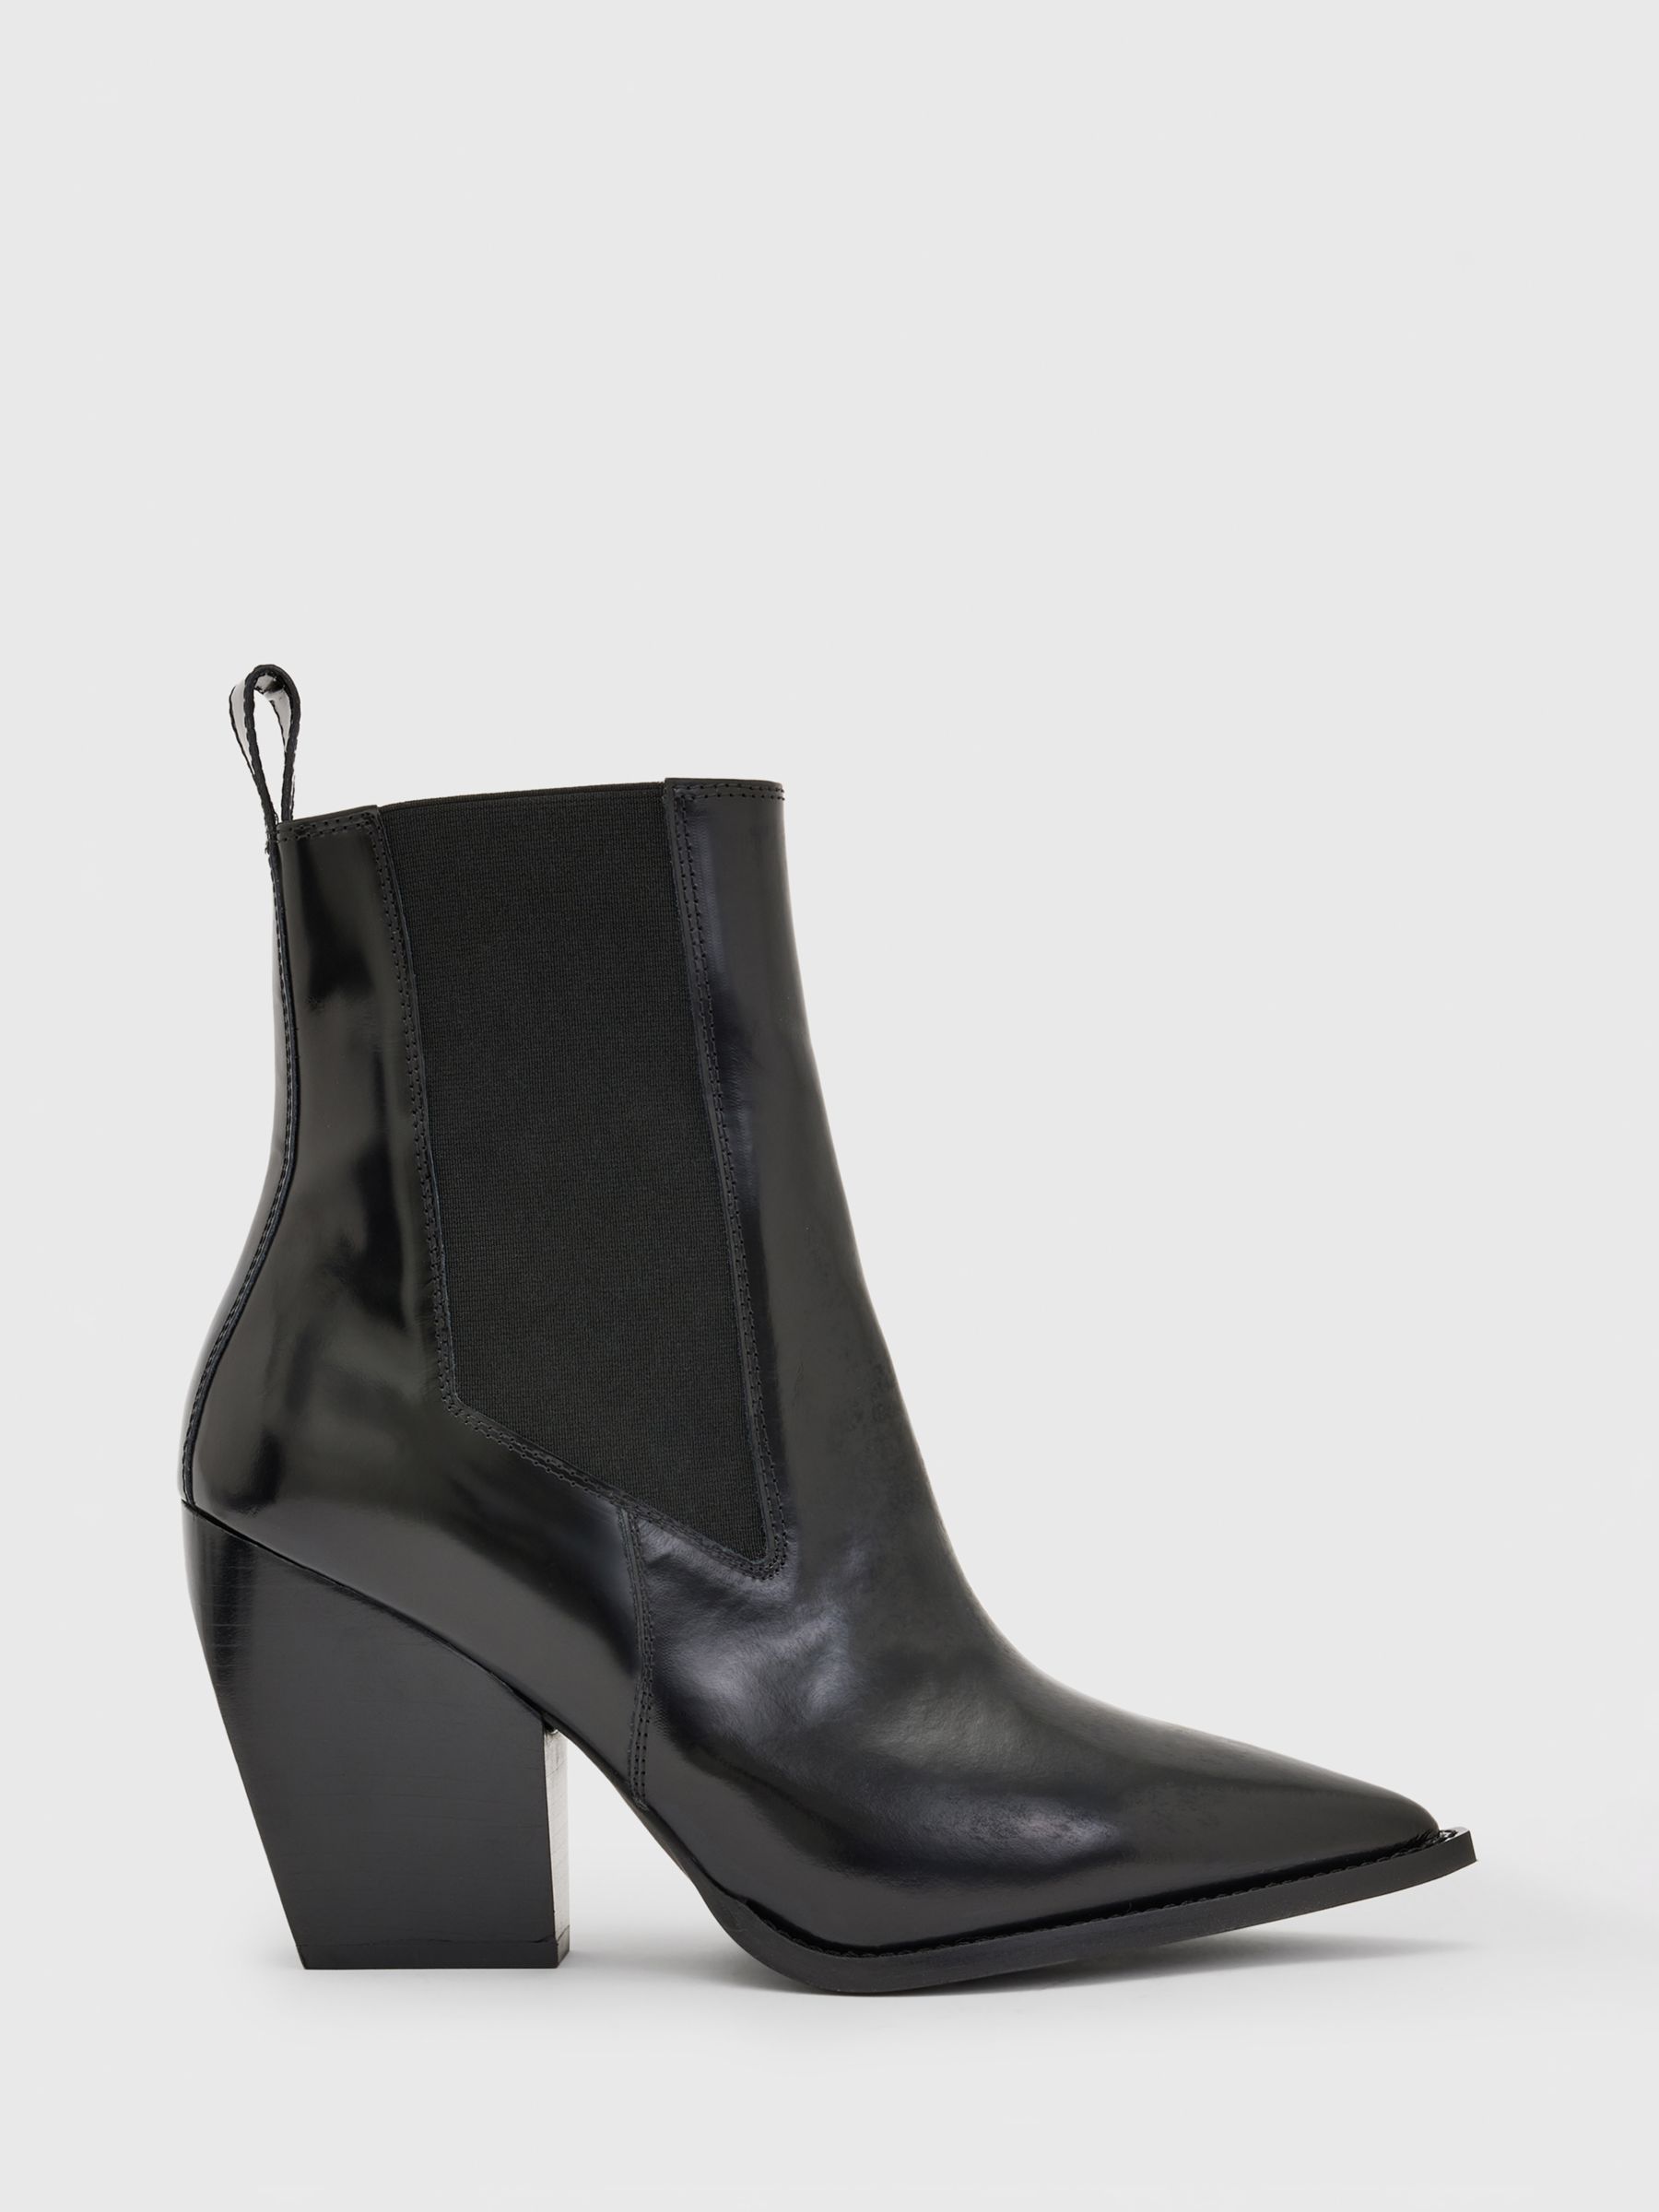 AllSaints Ria Leather Ankle Boots, Black at John Lewis & Partners